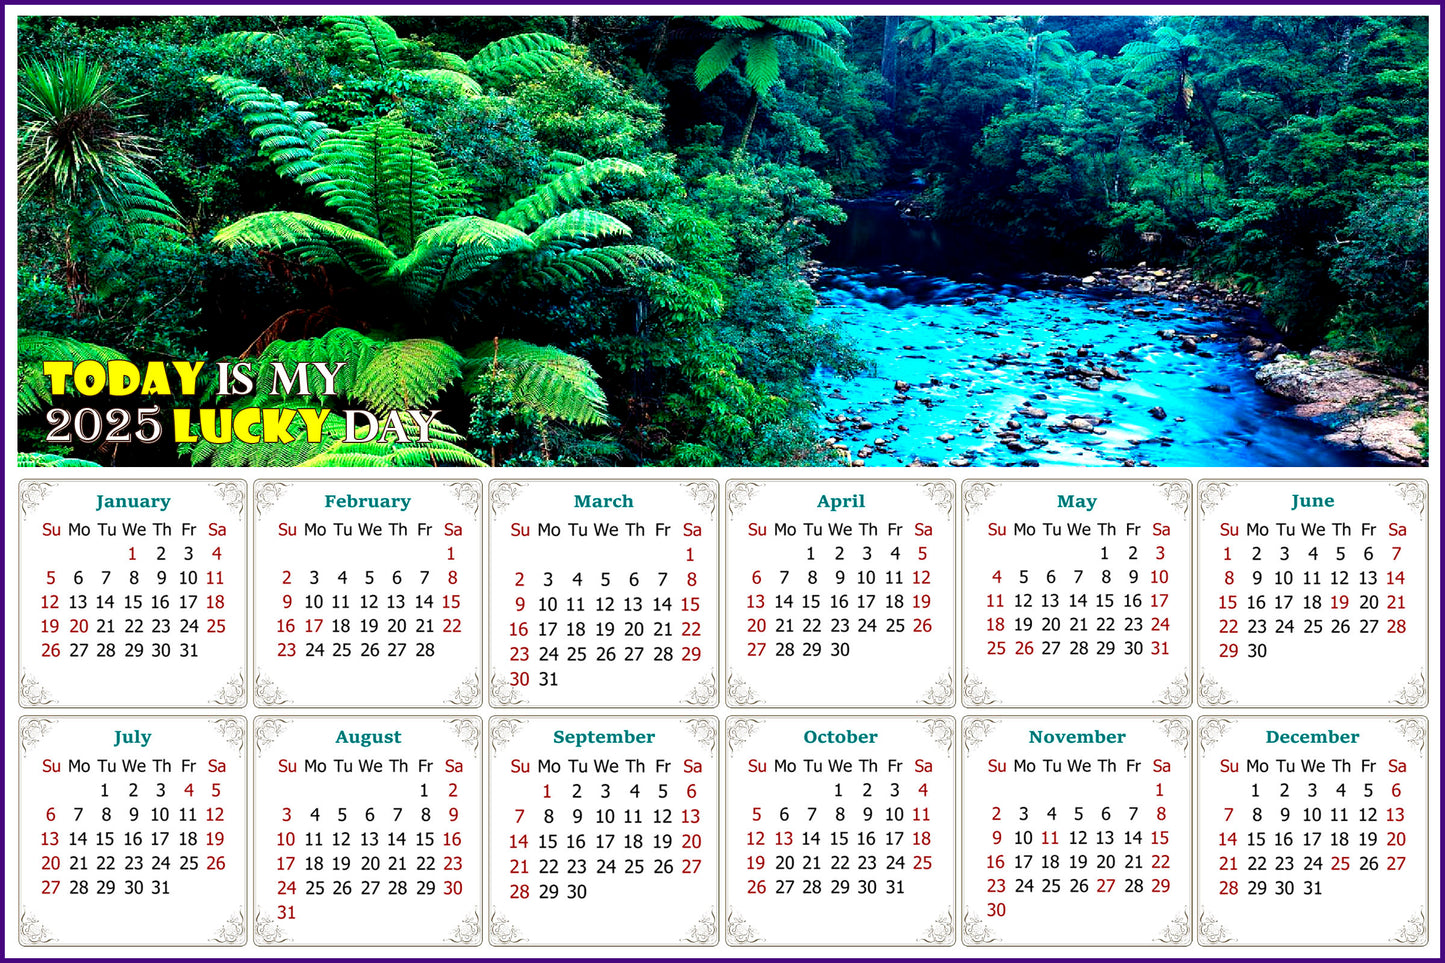 2025 Magnetic Calendar - Calendar Magnets - Today is My Lucky Day (Waipoua Kauri Reserve)